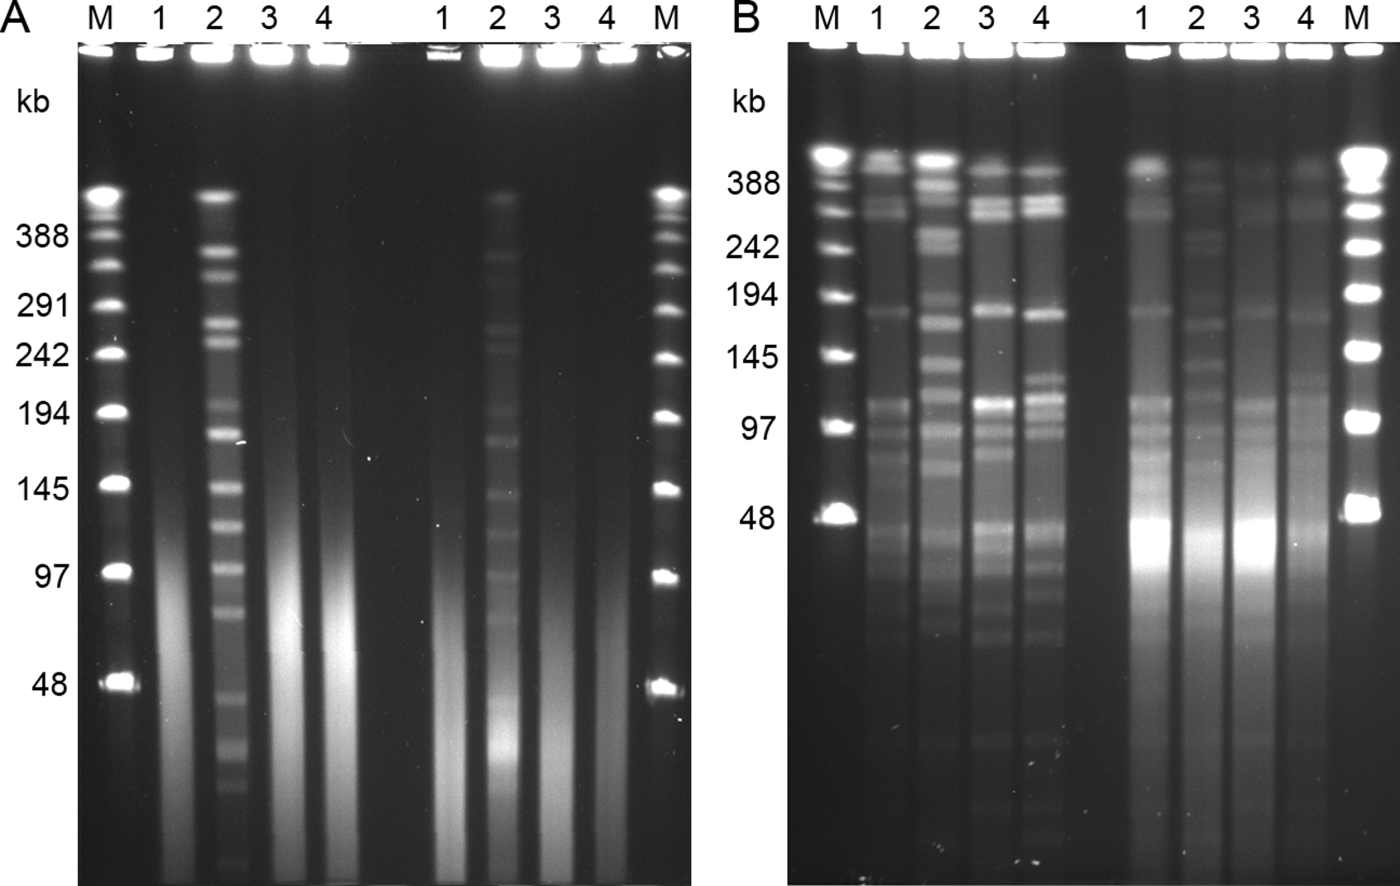 Figure 1.  PFGE patterns of SmaI digests of four avian strains of C. botulinum type C. Lane 1, strain 08-BKT015925; lane 2, 07-BKT002873; lane 3, 07-C6N; and lane 4, 07-V891. The four left lanes in each gel represent samples fixed with formaldehyde, and the four right lines represent samples without. The outermost lanes contain the Lambda Ladder PFG marker (M). 1a: Gel electrophoresed in 0.5x TBE buffer. 1b: Gel electrophoresed in HEPES buffer. The pulse time was ramped from 1 to 40 s for 24 h at (1a) 6 V/cm and (1b) 4 V/cm. Note that the best result appears from fixing cells in formaldehyde and performing electrophoresis in HEPES buffer.